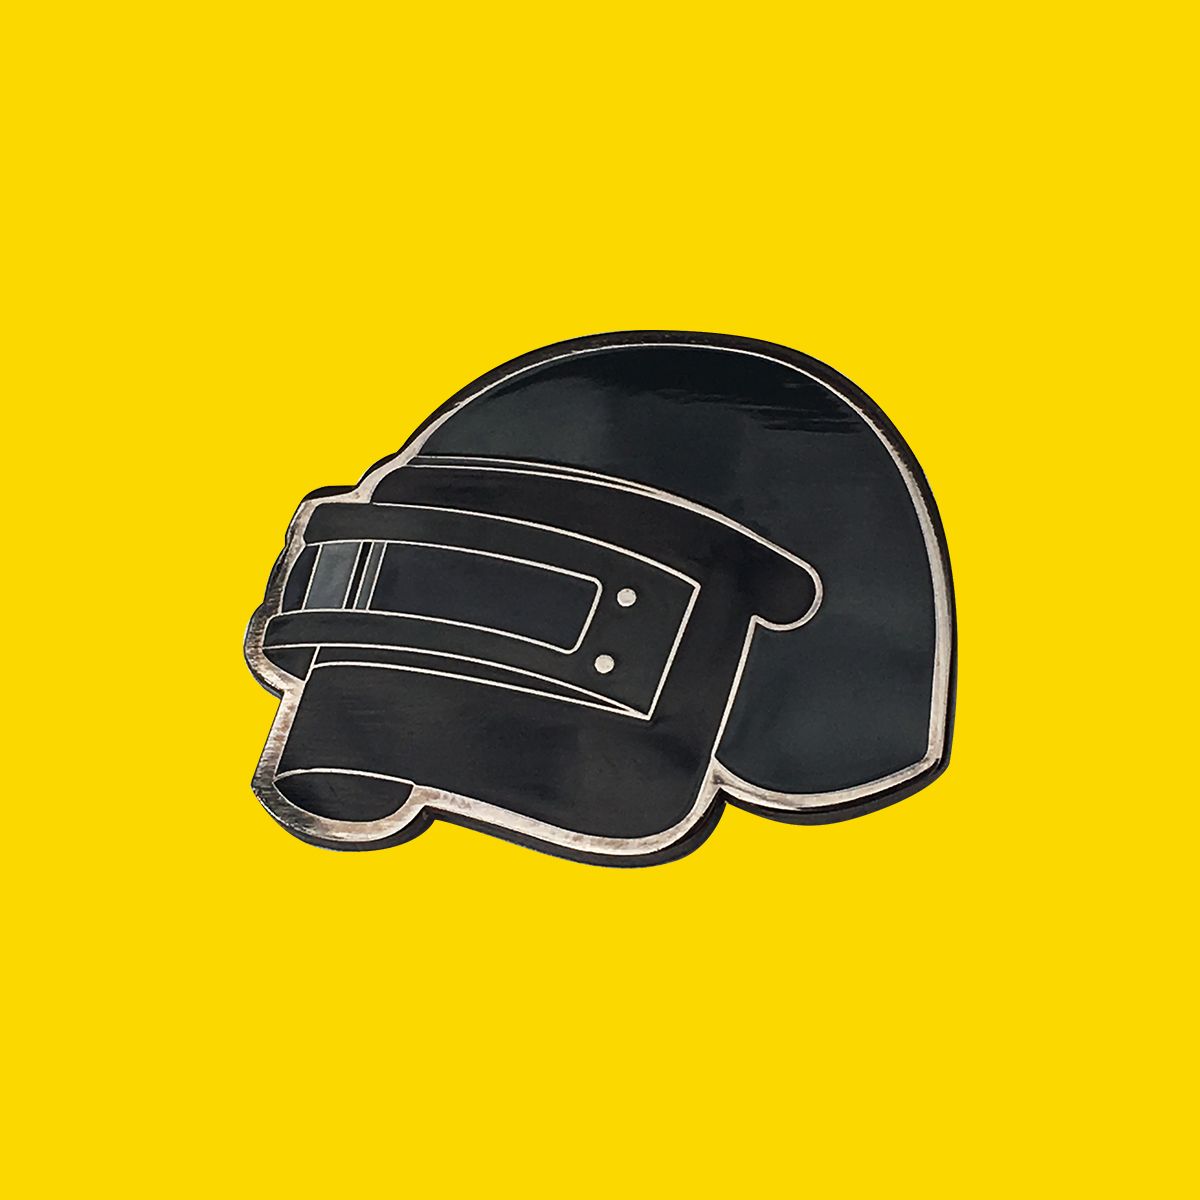 I designed some PUBG icons and turned them into pins. Pubg icon, Wallpaper free download, My design